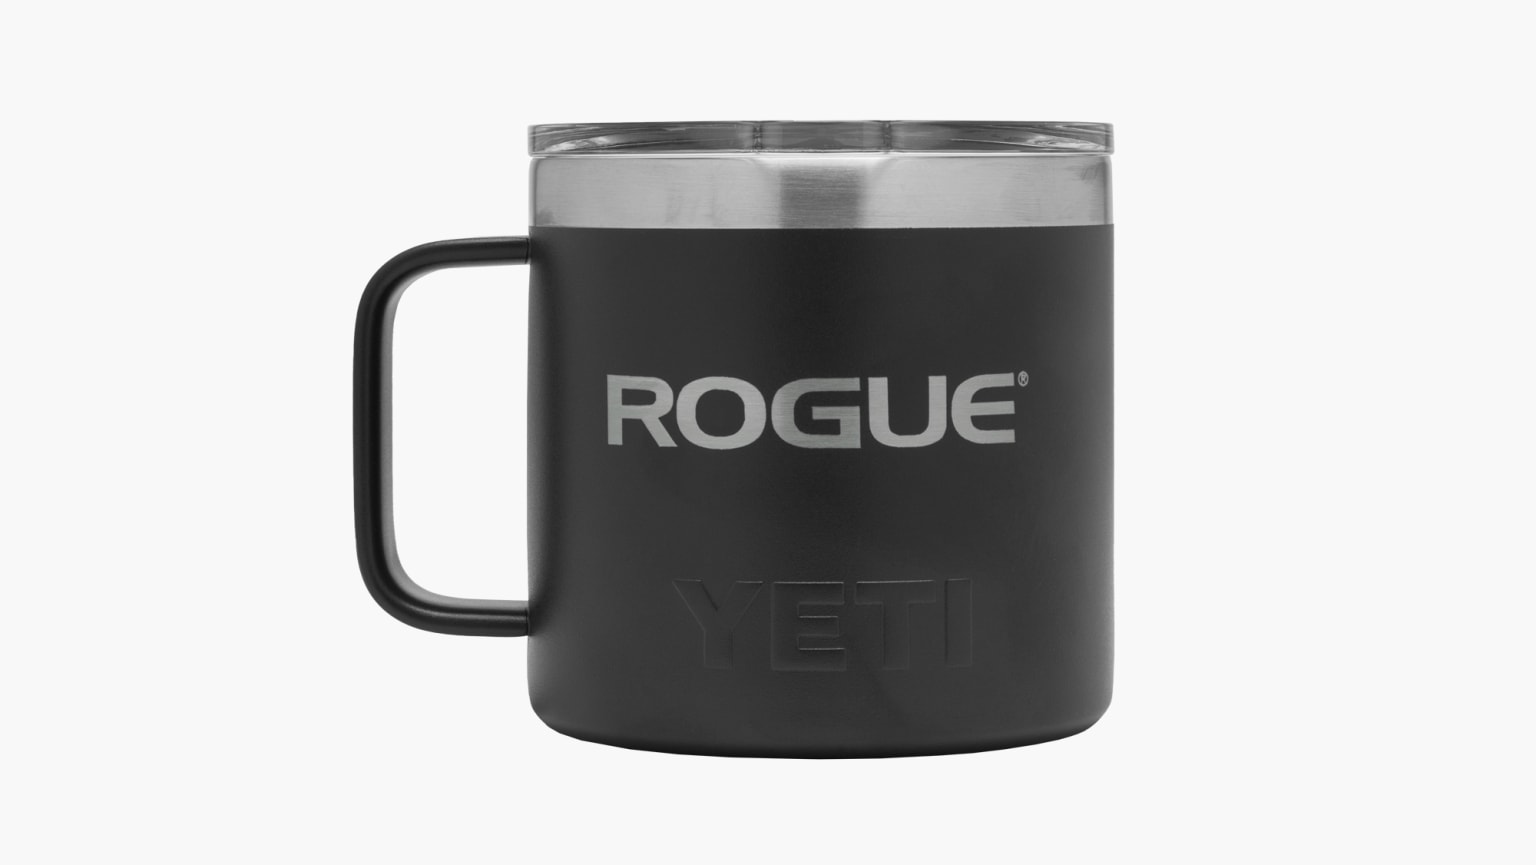 https://assets.roguefitness.com/f_auto,q_auto,c_limit,w_1536,b_rgb:f8f8f8/catalog/Gear%20and%20Accessories/Accessories/Shakers%20and%20Bottles/YT0063/YT0063-H_onavhx.png